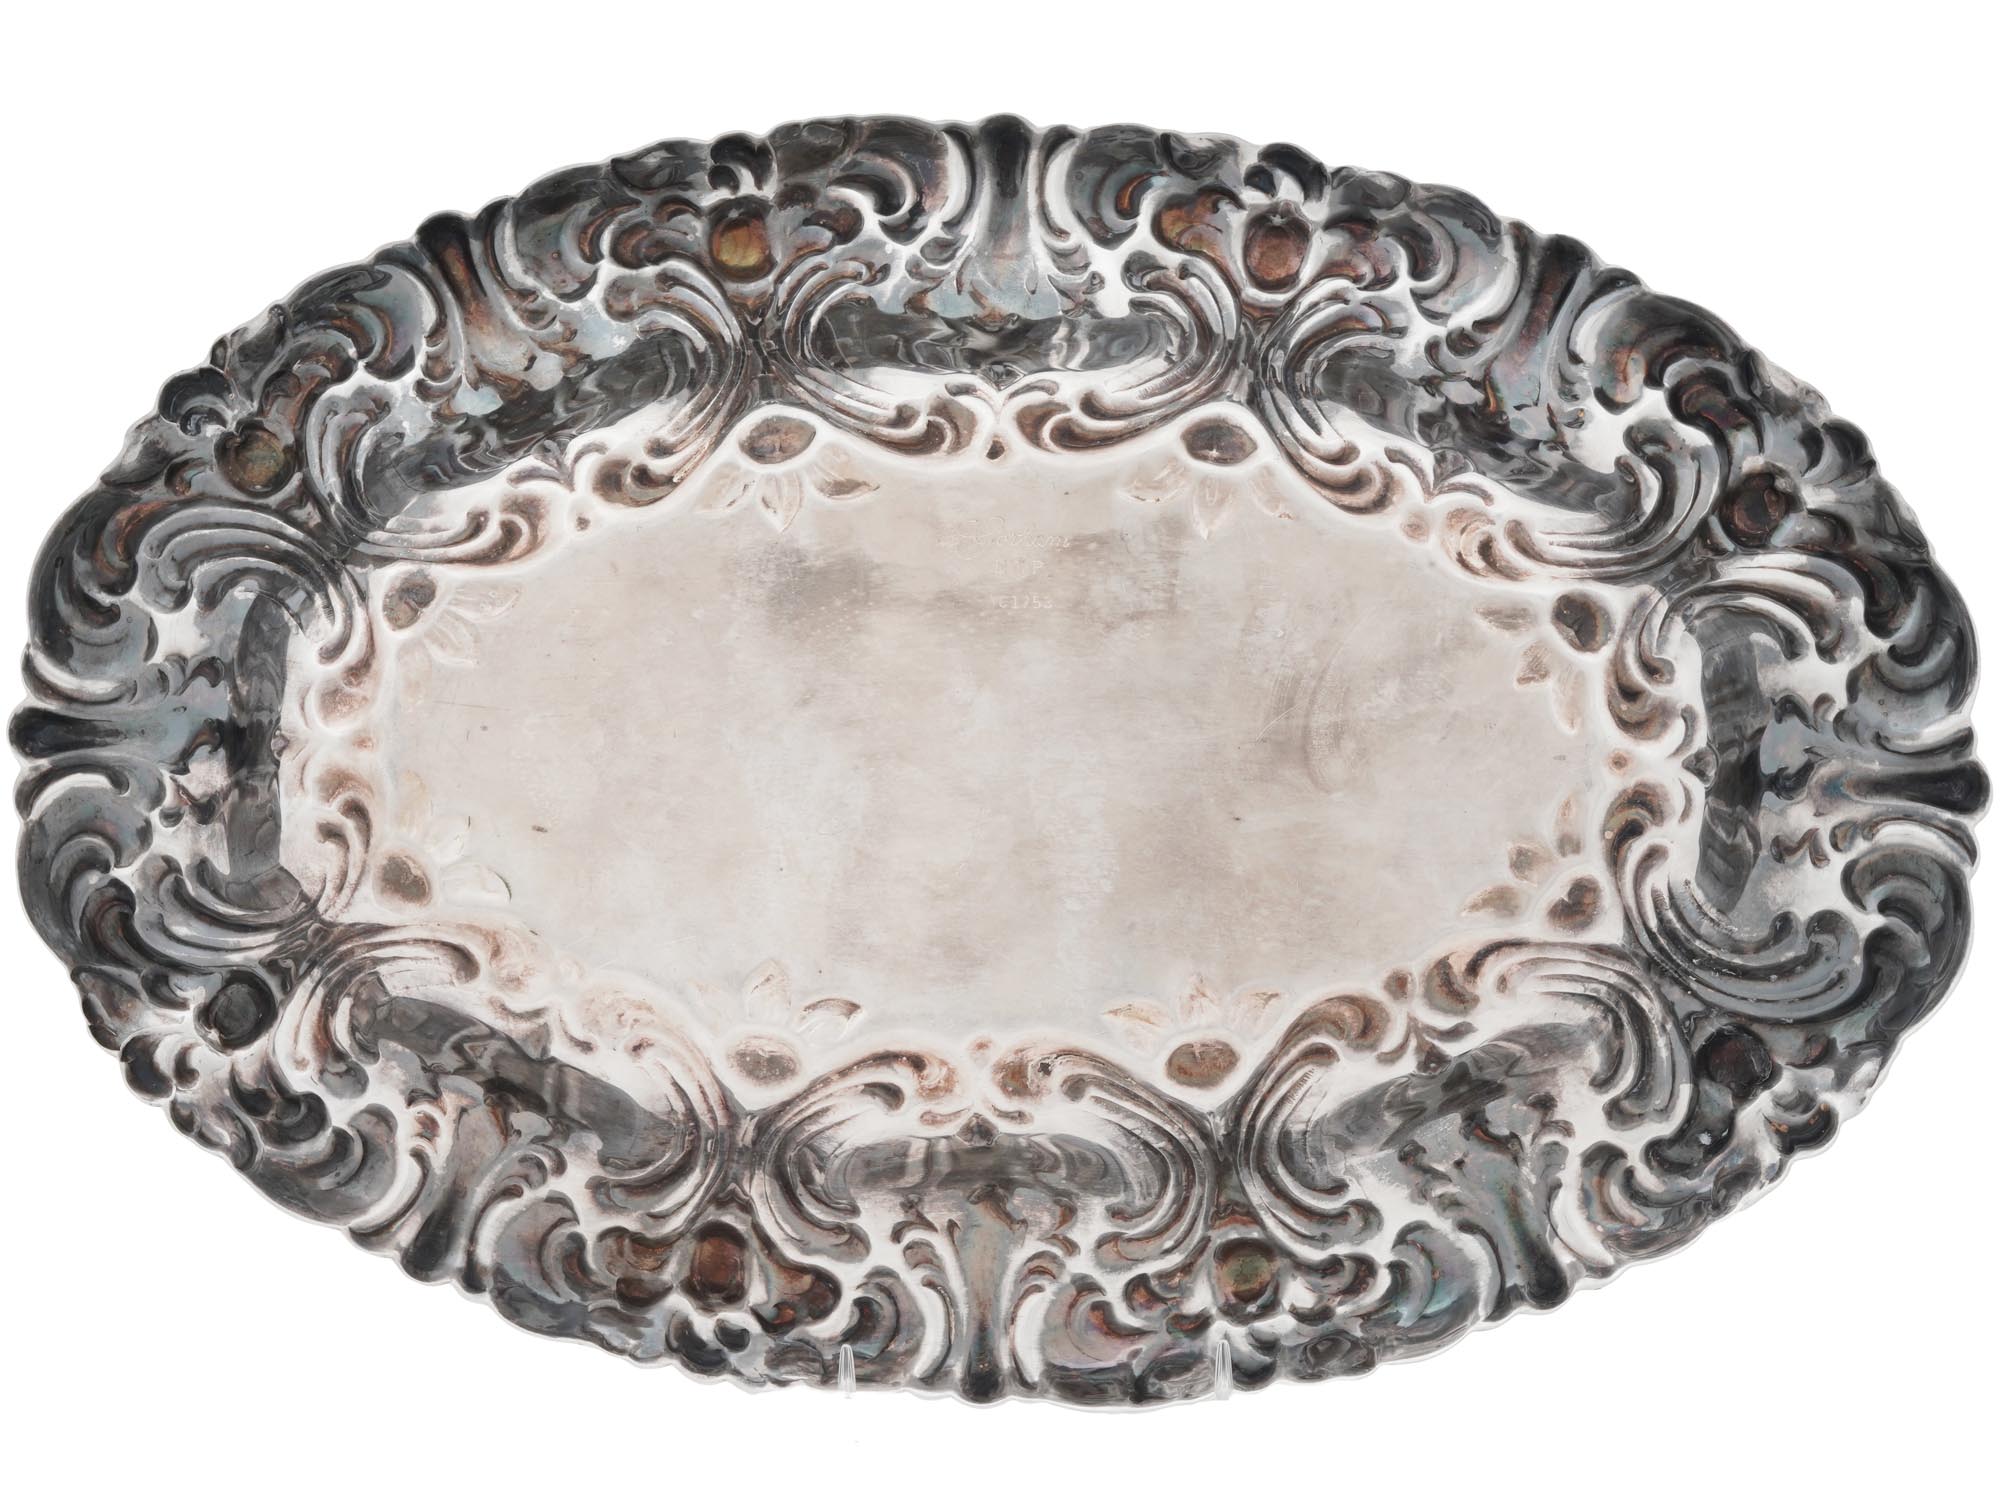 VINTAGE AMERICAN GORHAM REPOUSSE SILVER PLATE TRAY PIC-3